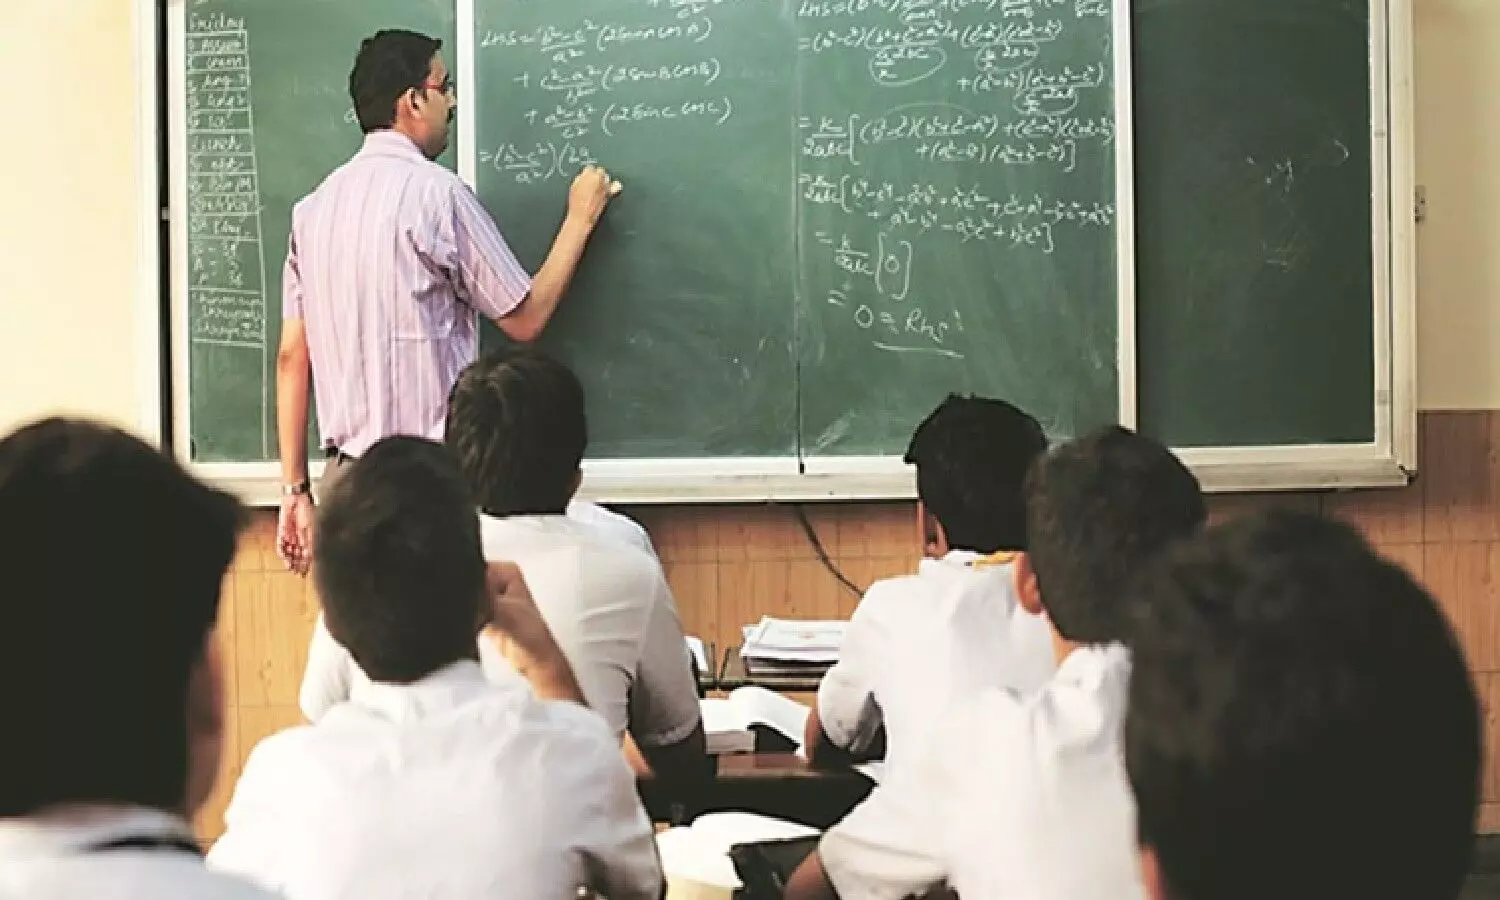 Allahabad High Court has issued a decree to stop teachers from doing non-academic work.